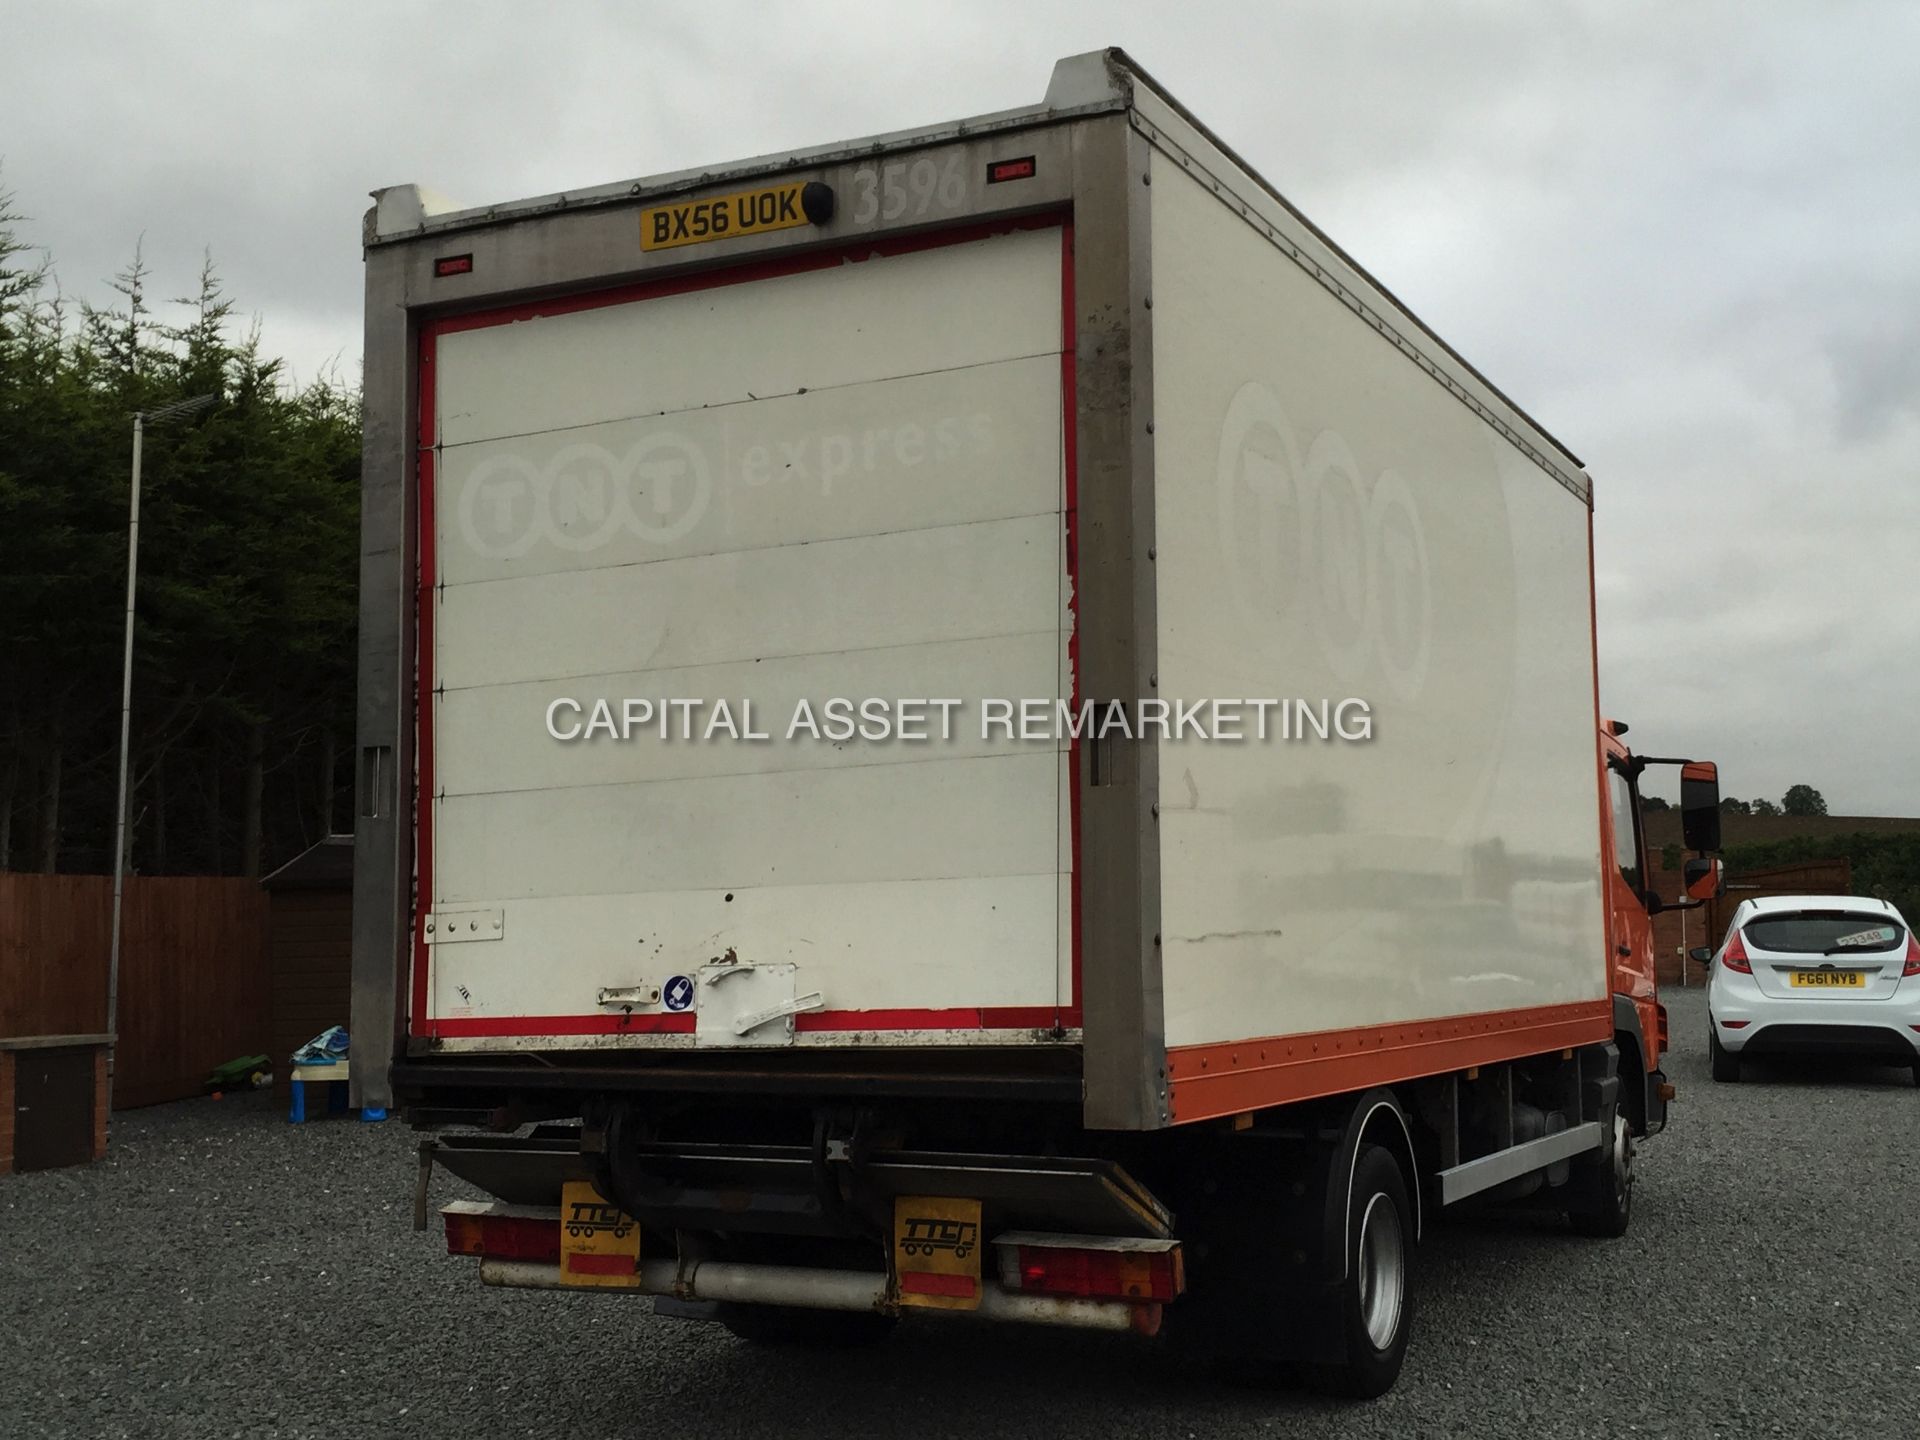 MERCEDES ATEGO 815 (2006 - 56 REG) 18 FT BOX LORRY **TUCK-AWAY TAIL LIFT** - Image 6 of 11